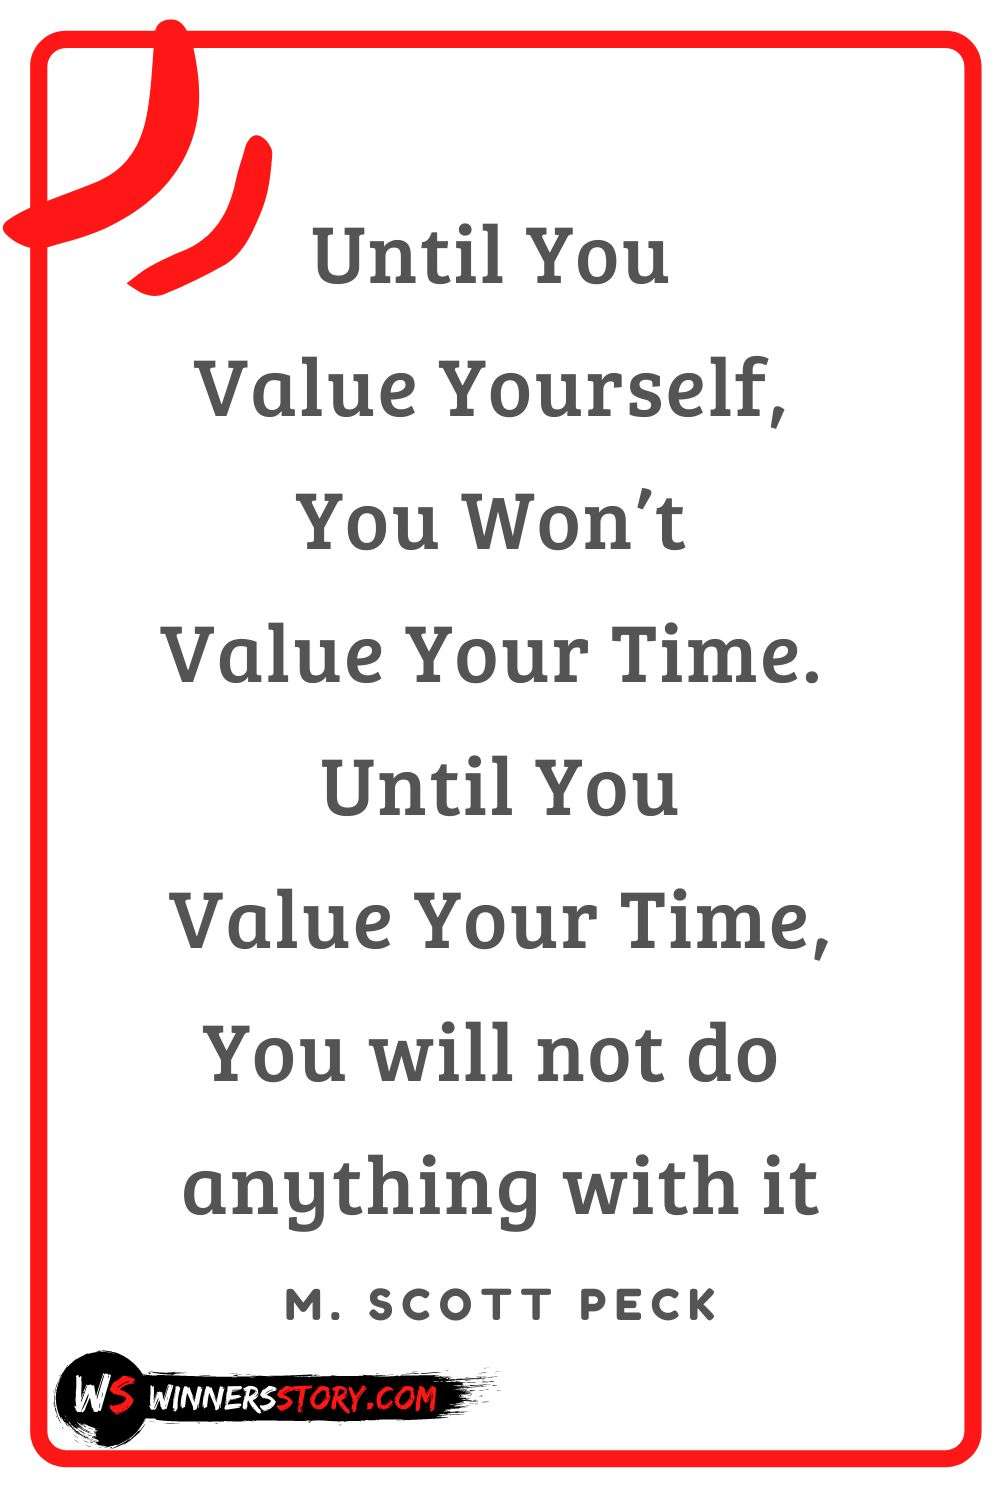 33-valued quotes